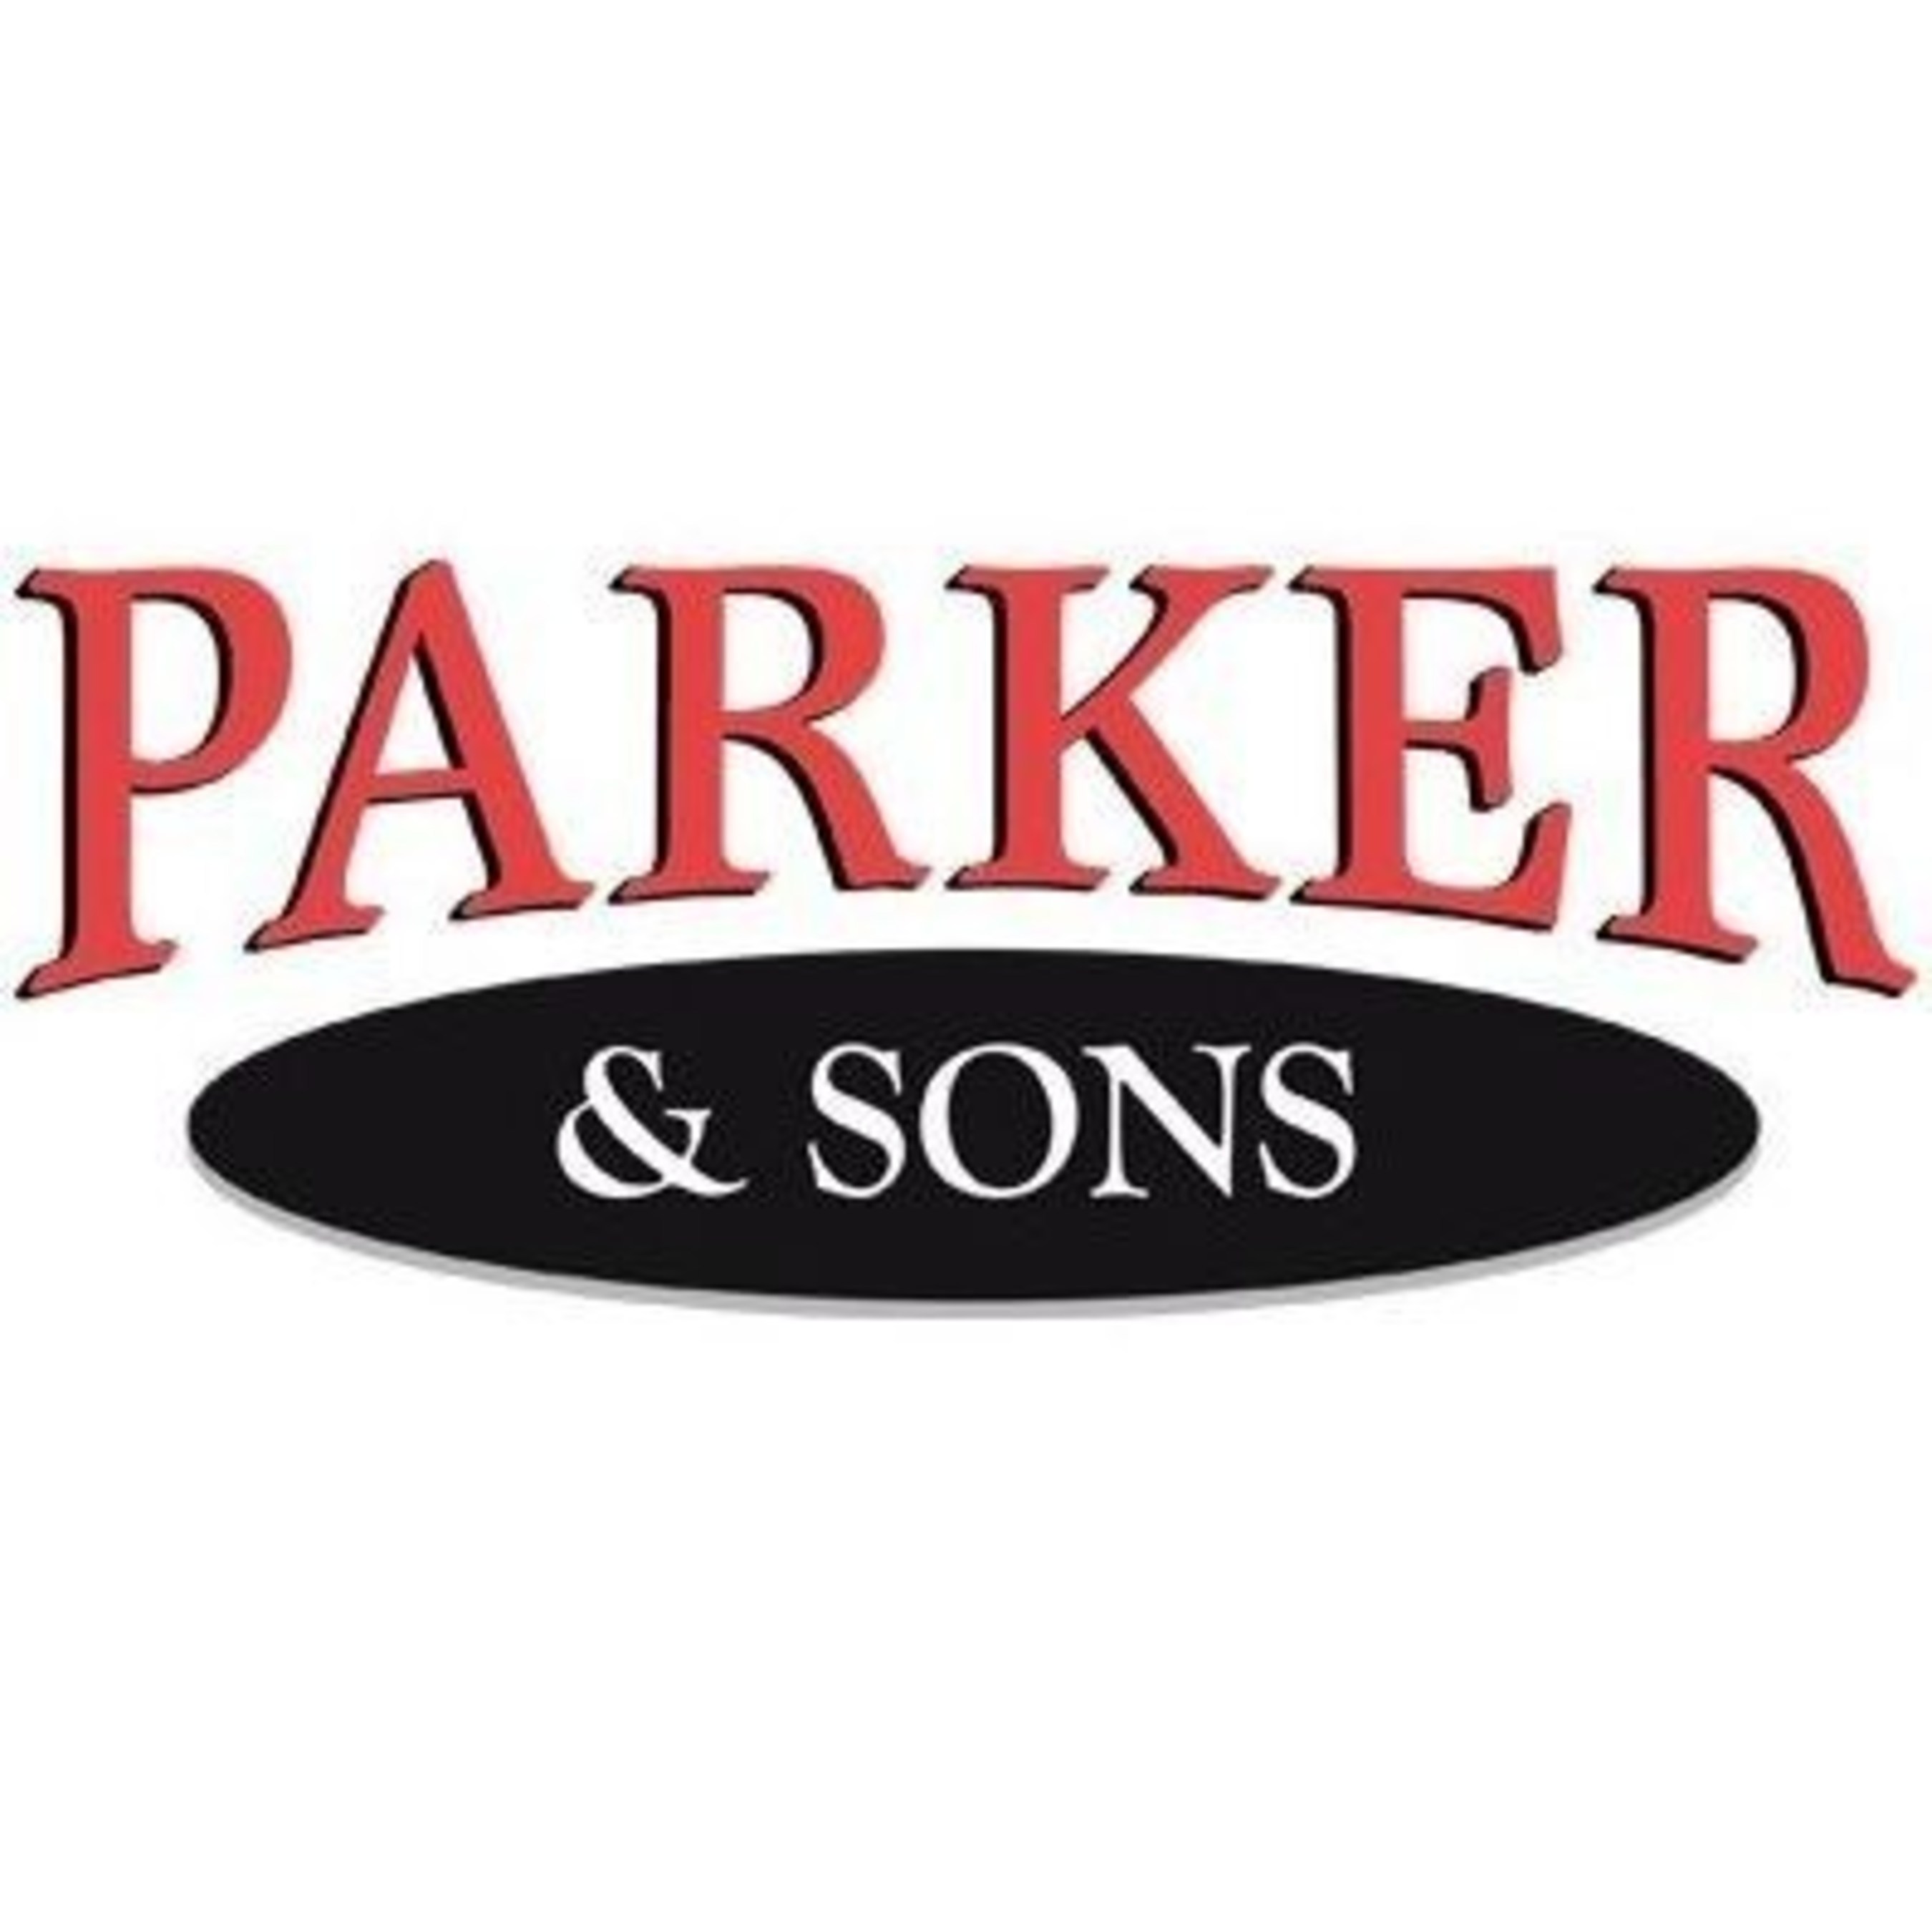 Parker & Sons Proud of Its Historic Commitment to Family Values